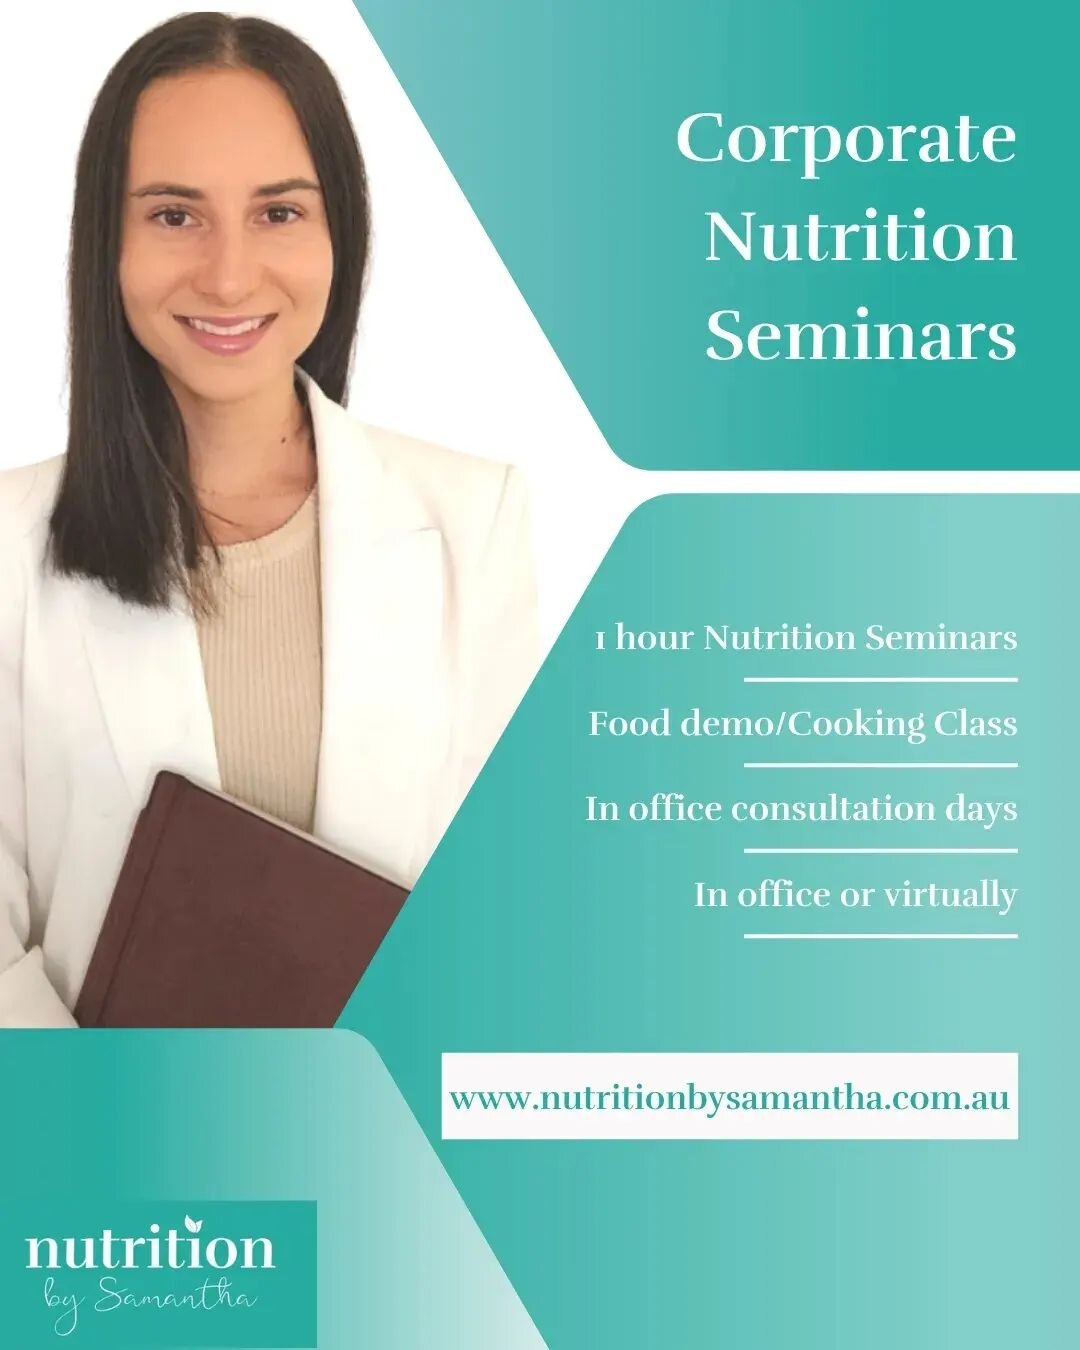 Did you know you can organise nutrition seminars for your workplace?💡

Workplace wellness initiatives have been shown to improve the productivity of your company, reduce absenteeism, improve company morale and overall job satisfaction. 

After worki